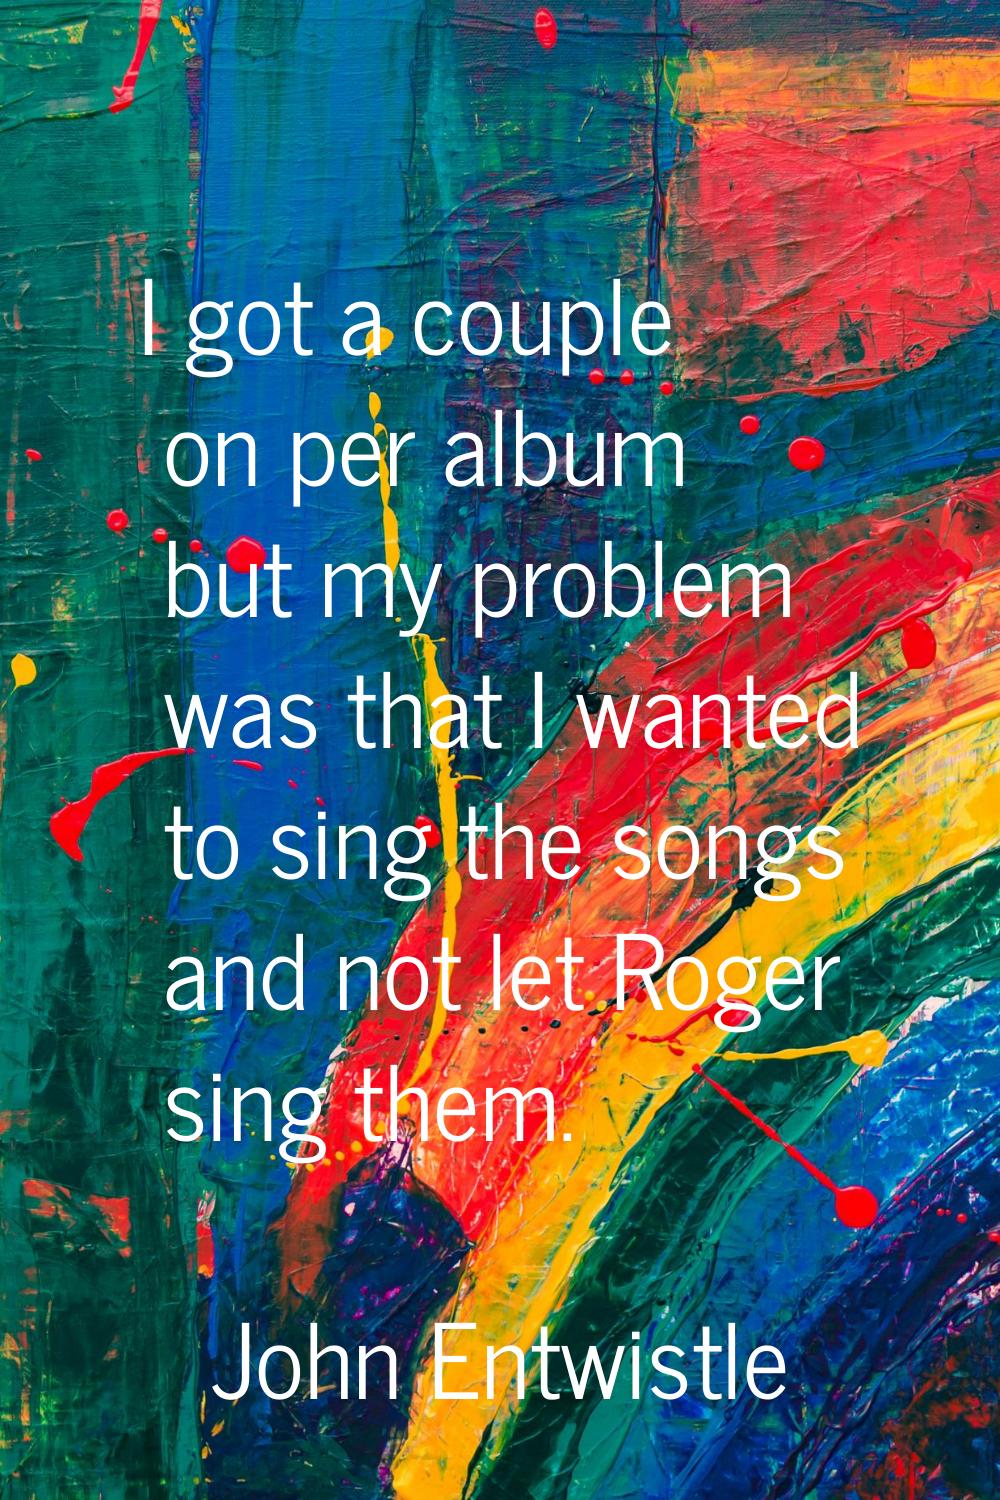 I got a couple on per album but my problem was that I wanted to sing the songs and not let Roger si